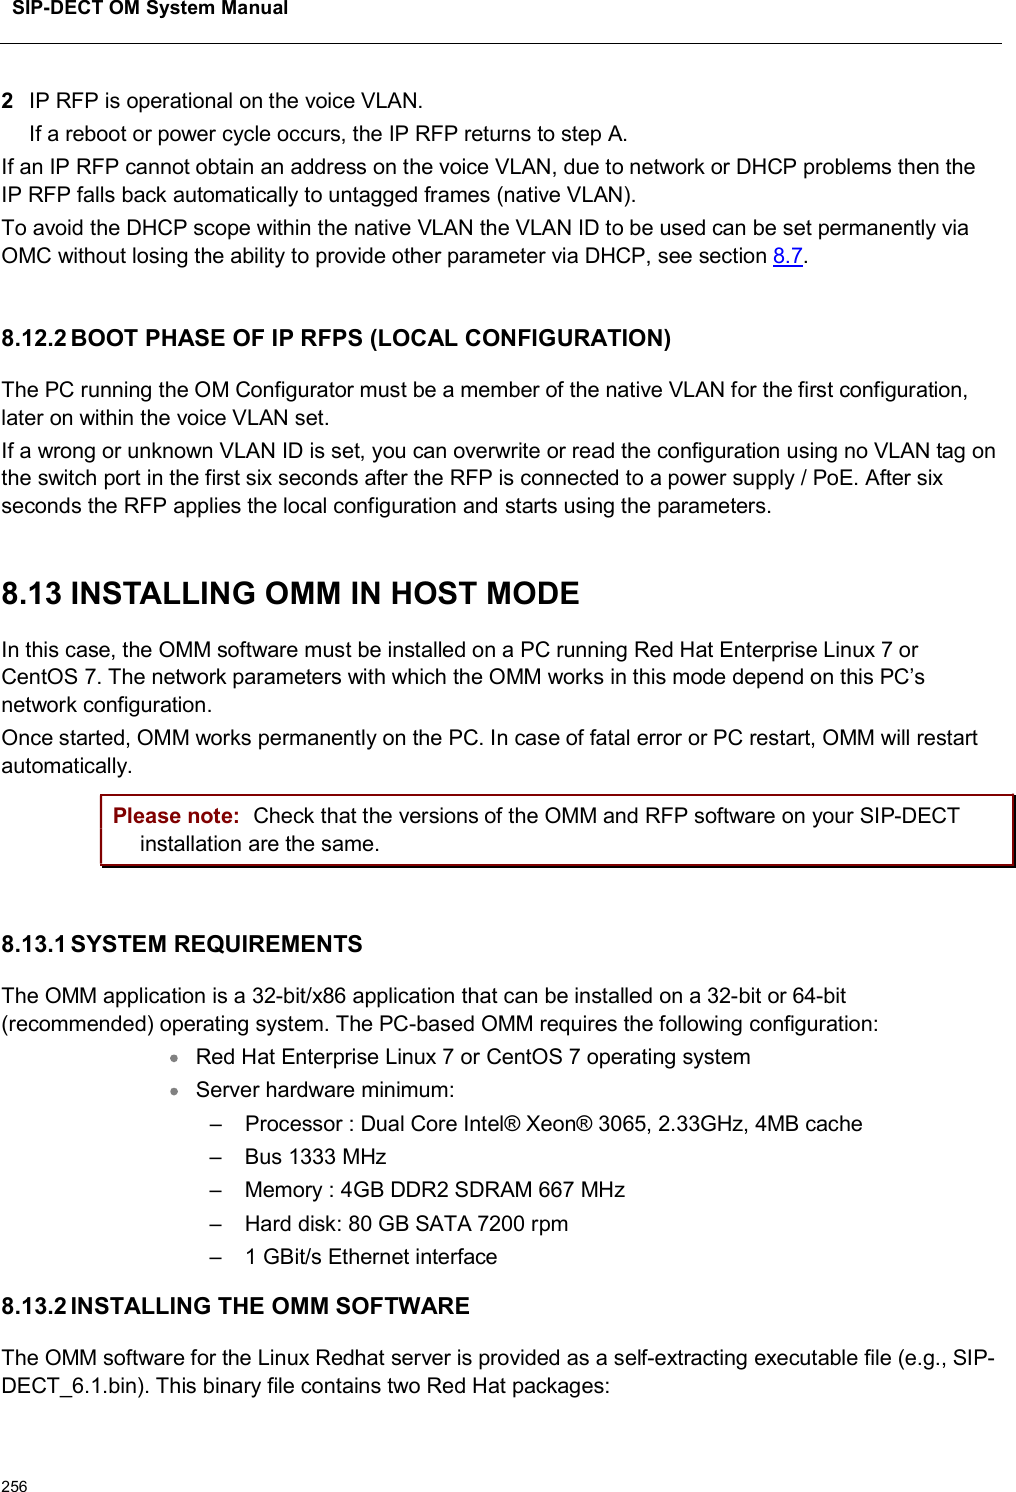 SIP-DECT OM System Manual2562IP RFP is operational on the voice VLAN. If a reboot or power cycle occurs, the IP RFP returns to step A.If an IP RFP cannot obtain an address on the voice VLAN, due to network or DHCP problems then the IP RFP falls back automatically to untagged frames (native VLAN).To avoid the DHCP scope within the native VLAN the VLAN ID to be used can be set permanently via OMC without losing the ability to provide other parameter via DHCP, see section 8.7.8.12.2 BOOT PHASE OF IP RFPS (LOCAL CONFIGURATION)The PC running the OM Configurator must be a member of the native VLAN for the first configuration, later on within the voice VLAN set.If a wrong or unknown VLAN ID is set, you can overwrite or read the configuration using no VLAN tag on the switch port in the first six seconds after the RFP is connected to a power supply / PoE. After six seconds the RFP applies the local configuration and starts using the parameters.8.13 INSTALLING OMM IN HOST MODEIn this case, the OMM software must be installed on a PC running Red Hat Enterprise Linux 7 or CentOS 7. The network parameters with which the OMM works in this mode depend on this PC’s network configuration.Once started, OMM works permanently on the PC. In case of fatal error or PC restart, OMM will restart automatically. Please note: Check that the versions of the OMM and RFP software on your SIP-DECTinstallation are the same. 8.13.1 SYSTEM REQUIREMENTSThe OMM application is a 32-bit/x86 application that can be installed on a 32-bit or 64-bit (recommended) operating system. The PC-based OMM requires the following configuration: Red Hat Enterprise Linux 7 or CentOS 7 operating systemServer hardware minimum: – Processor : Dual Core Intel® Xeon® 3065, 2.33GHz, 4MB cache– Bus 1333 MHz – Memory : 4GB DDR2 SDRAM 667 MHz – Hard disk: 80 GB SATA 7200 rpm – 1 GBit/s Ethernet interface 8.13.2 INSTALLING THE OMM SOFTWAREThe OMM software for the Linux Redhat server is provided as a self-extracting executable file (e.g., SIP-DECT_6.1.bin). This binary file contains two Red Hat packages: